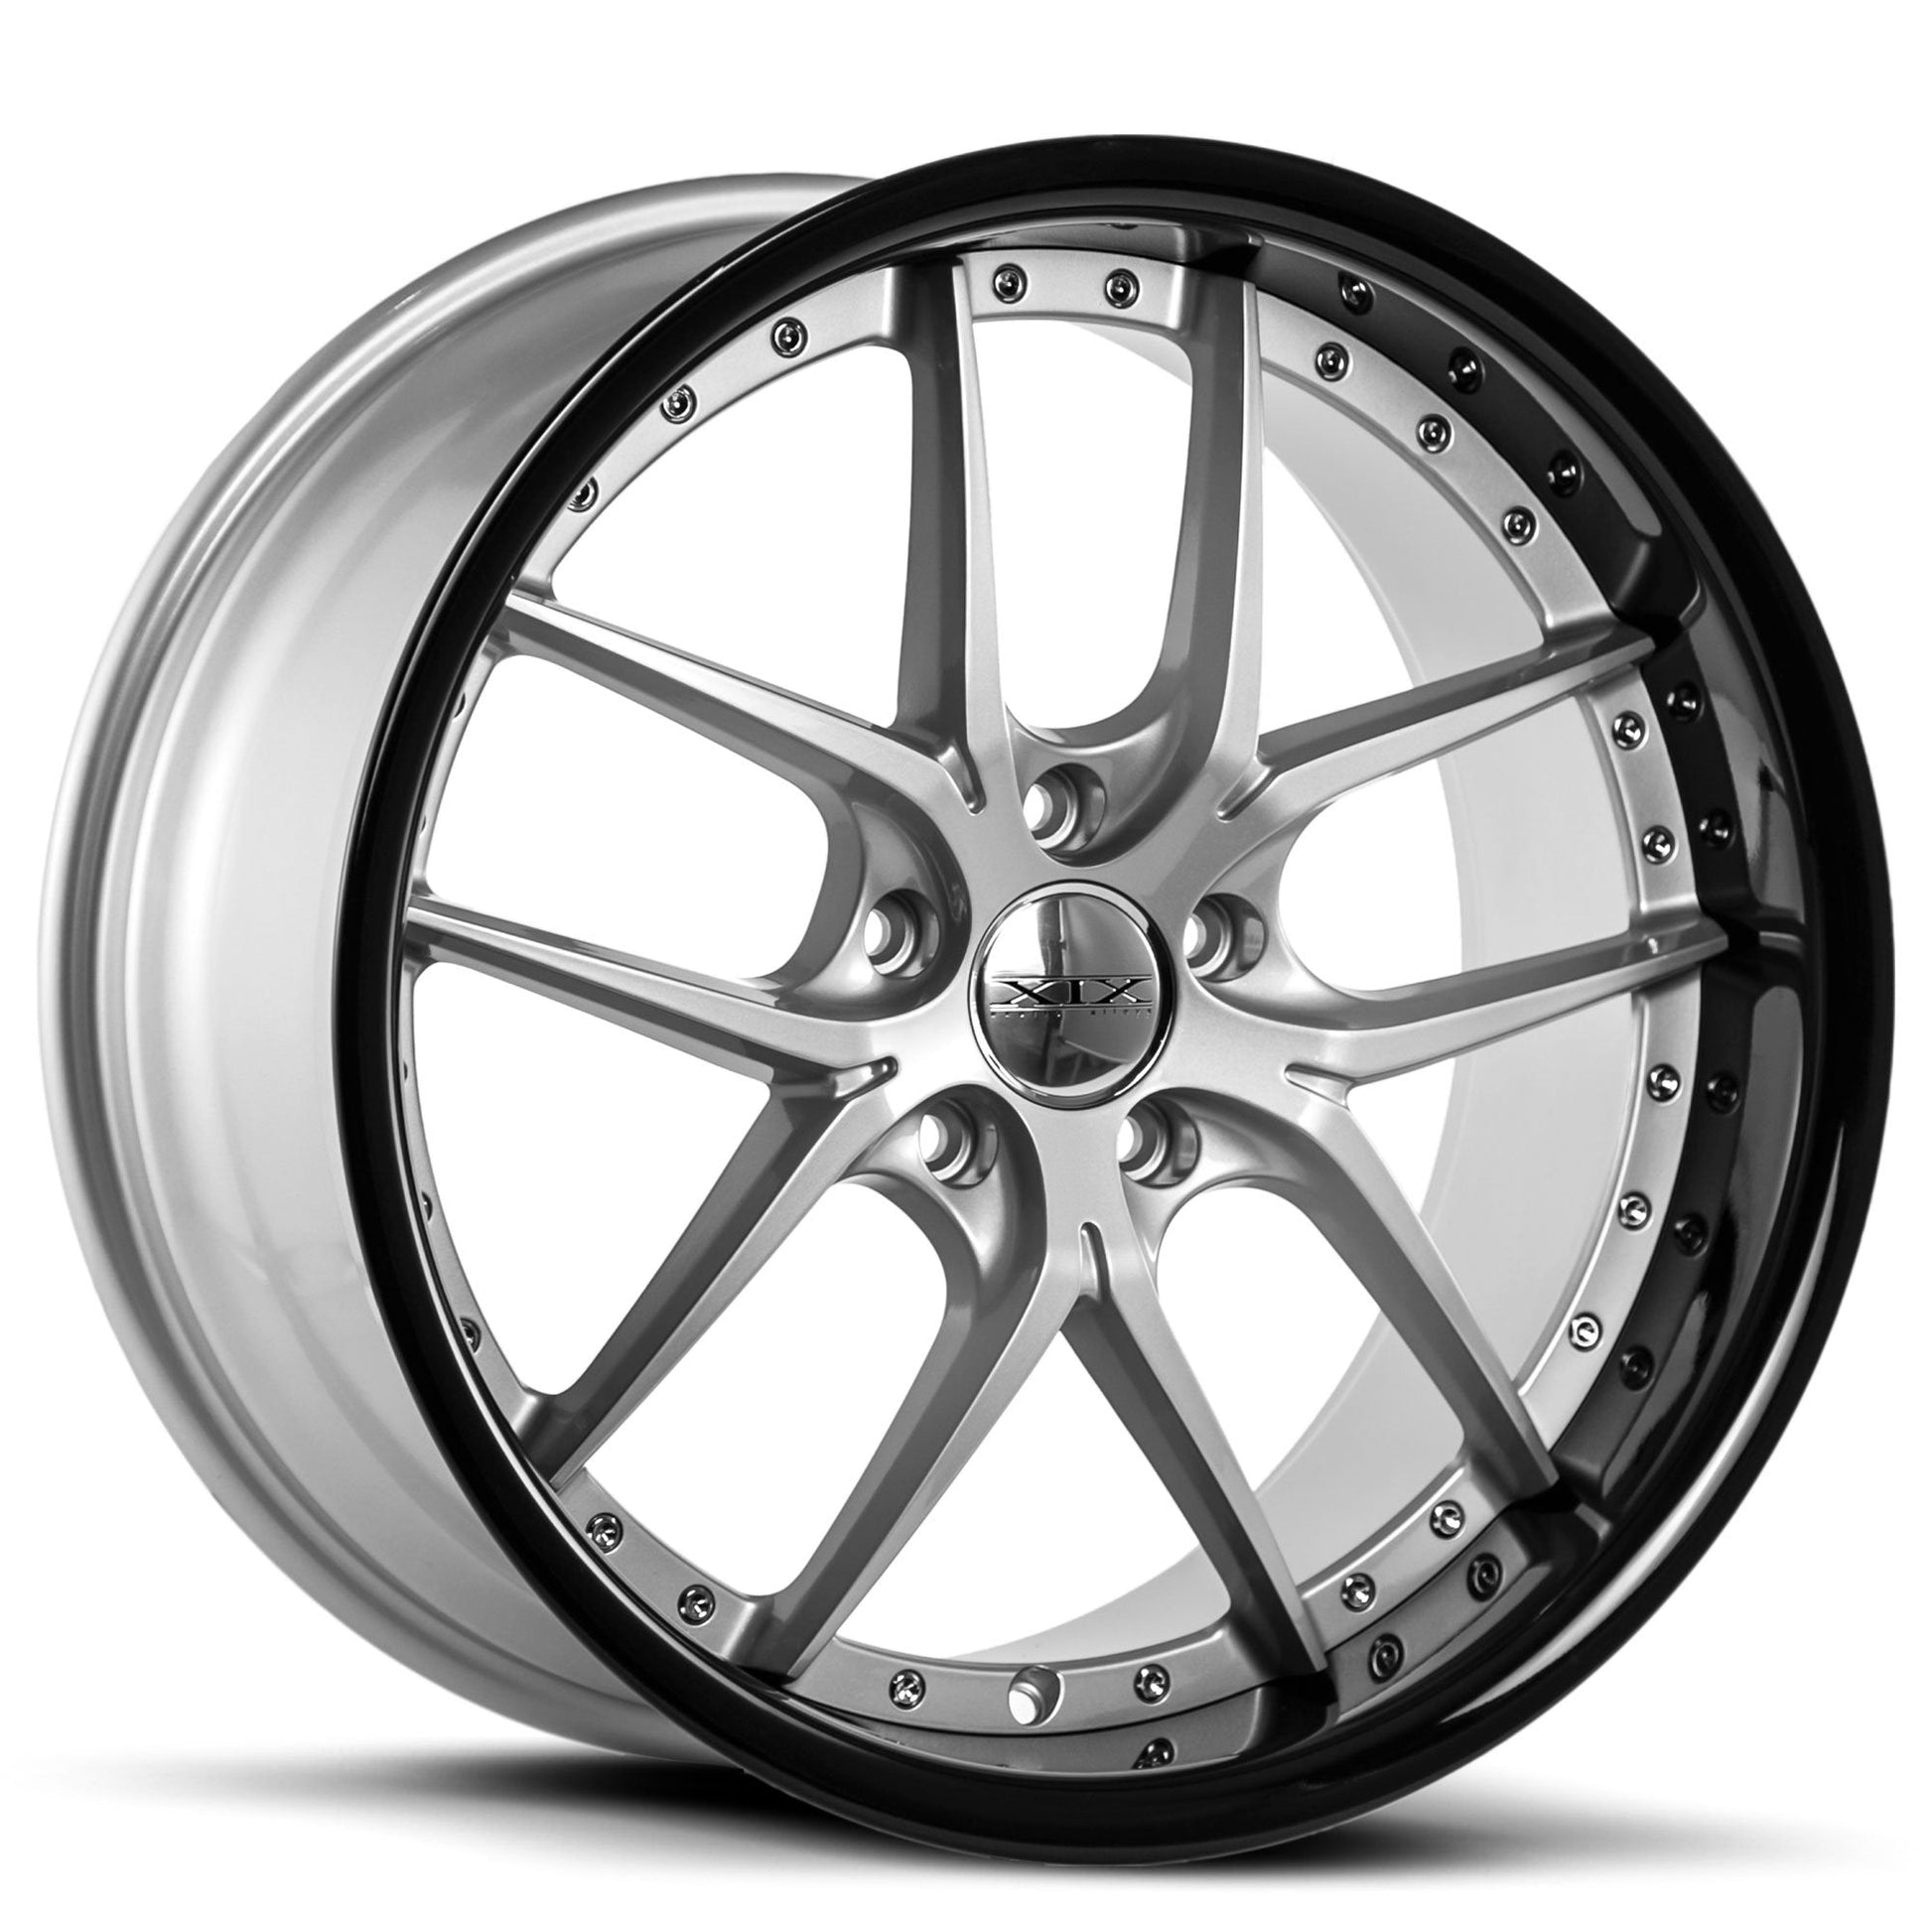 XIX-X61-Silver-Machined-with-Stainless-Steel-Lip-Silver-20x8.5-73.1-wheels-rims-felger-Felghuset